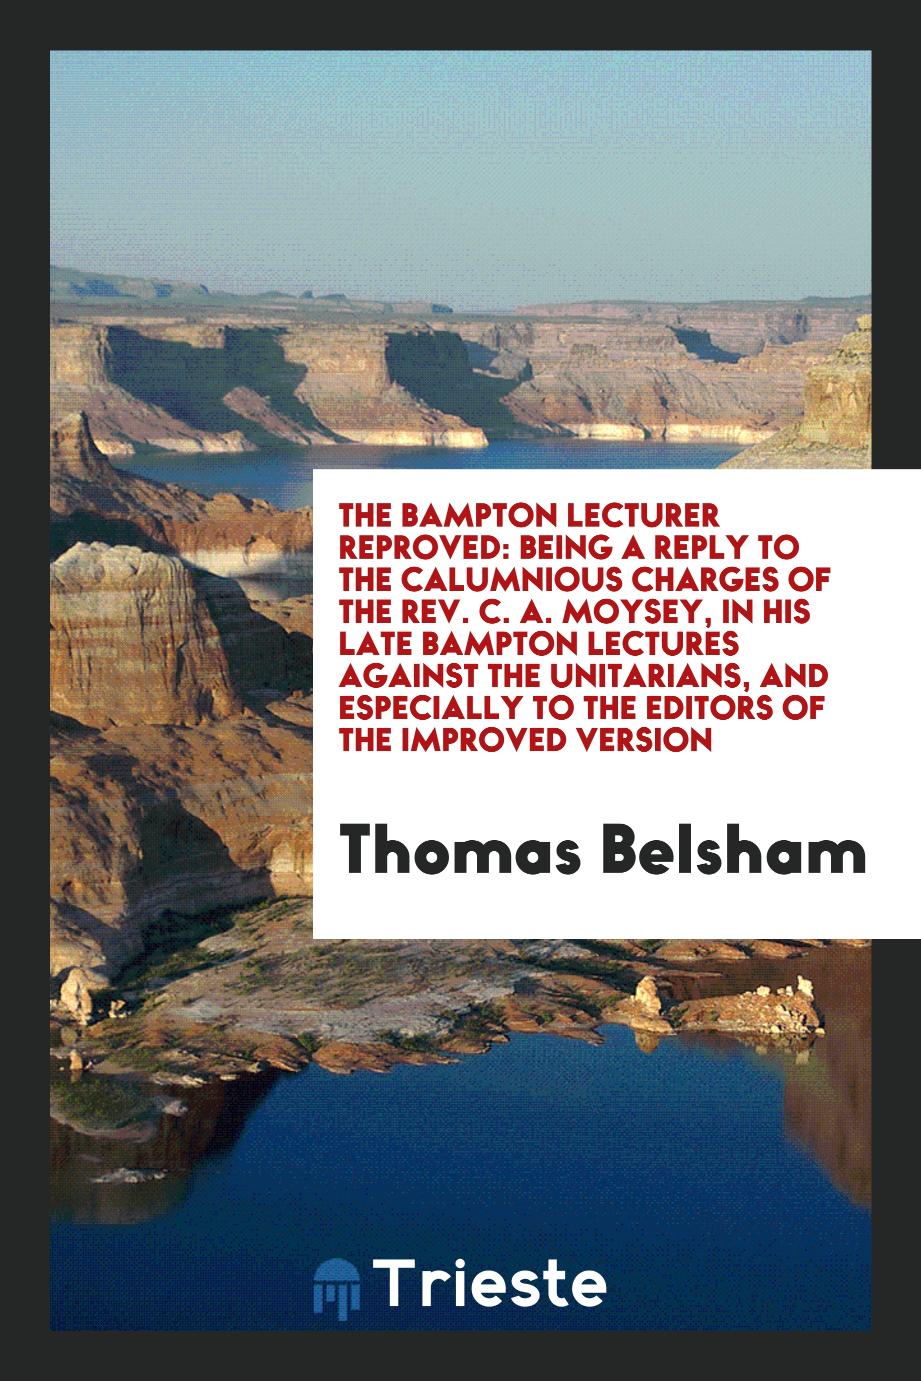 The Bampton Lecturer Reproved: Being a Reply to the Calumnious Charges of the Rev. C. A. Moysey, in His Late Bampton Lectures Against the Unitarians, and Especially to the Editors of the Improved Version